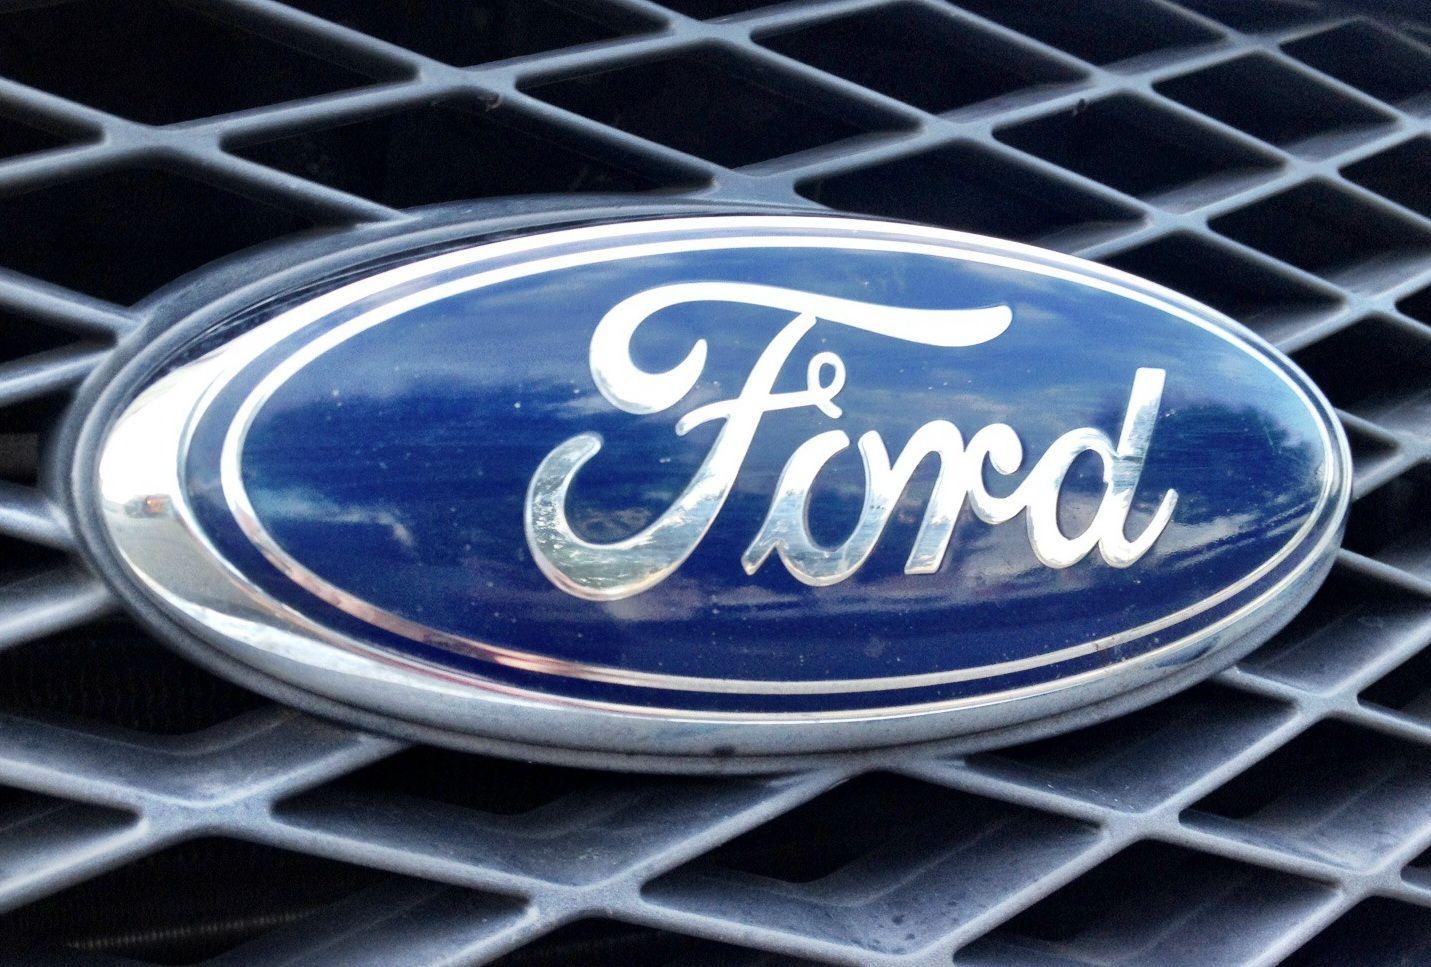 Ford Logo - Ford Logo, Ford Car Symbol Meaning and History | Car Brand Names.com